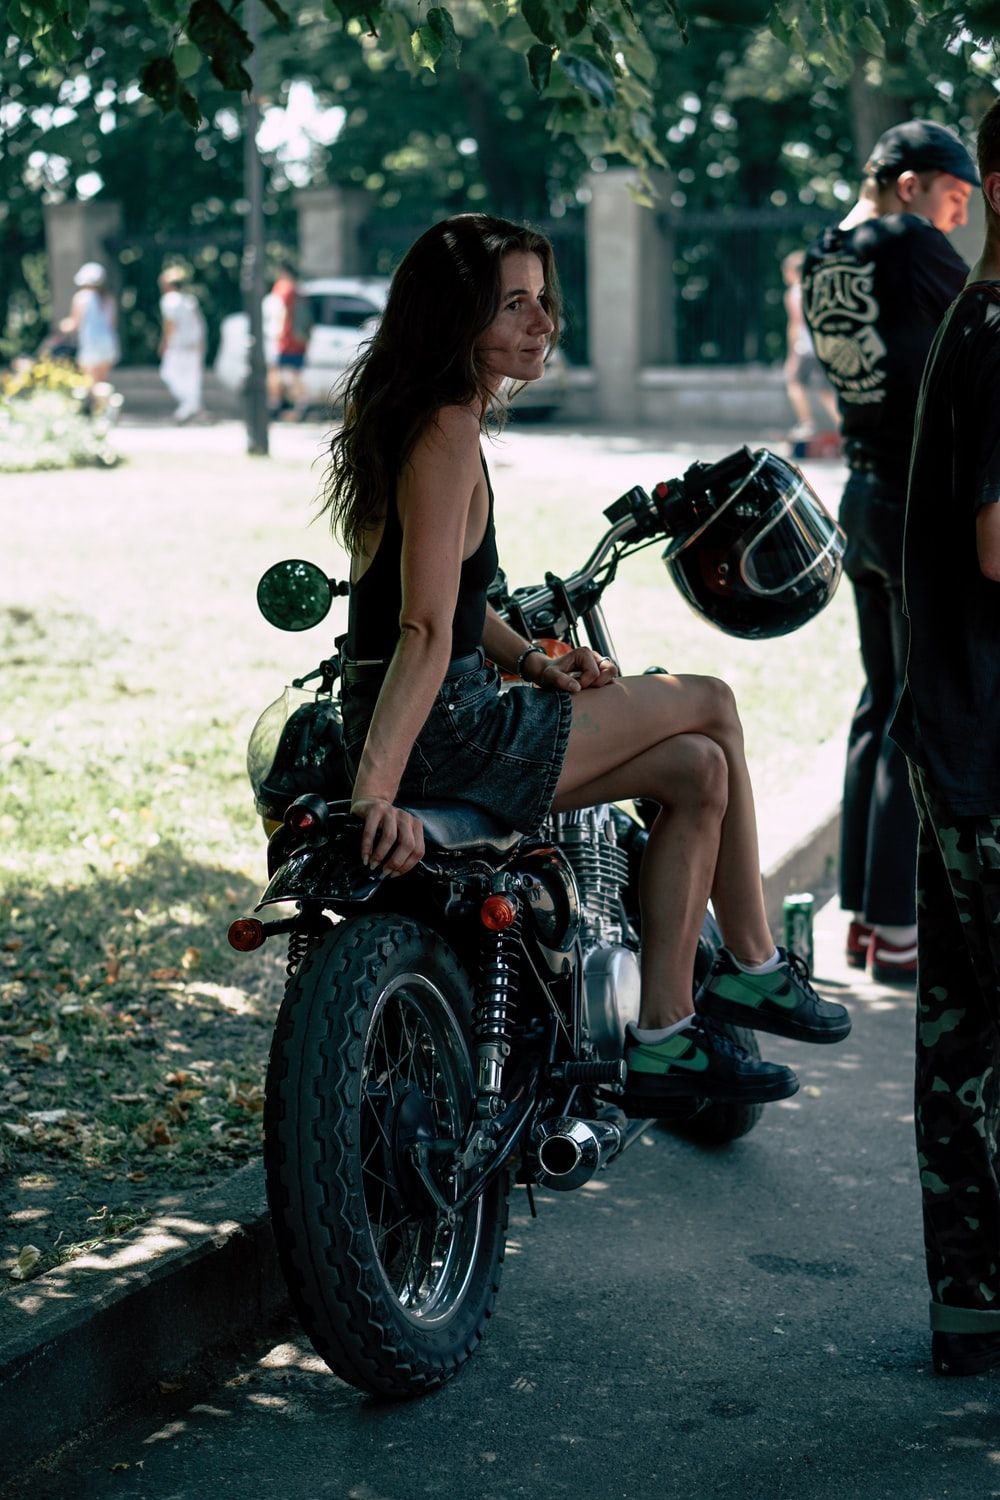 Biker Chick Picture. Download Free Image